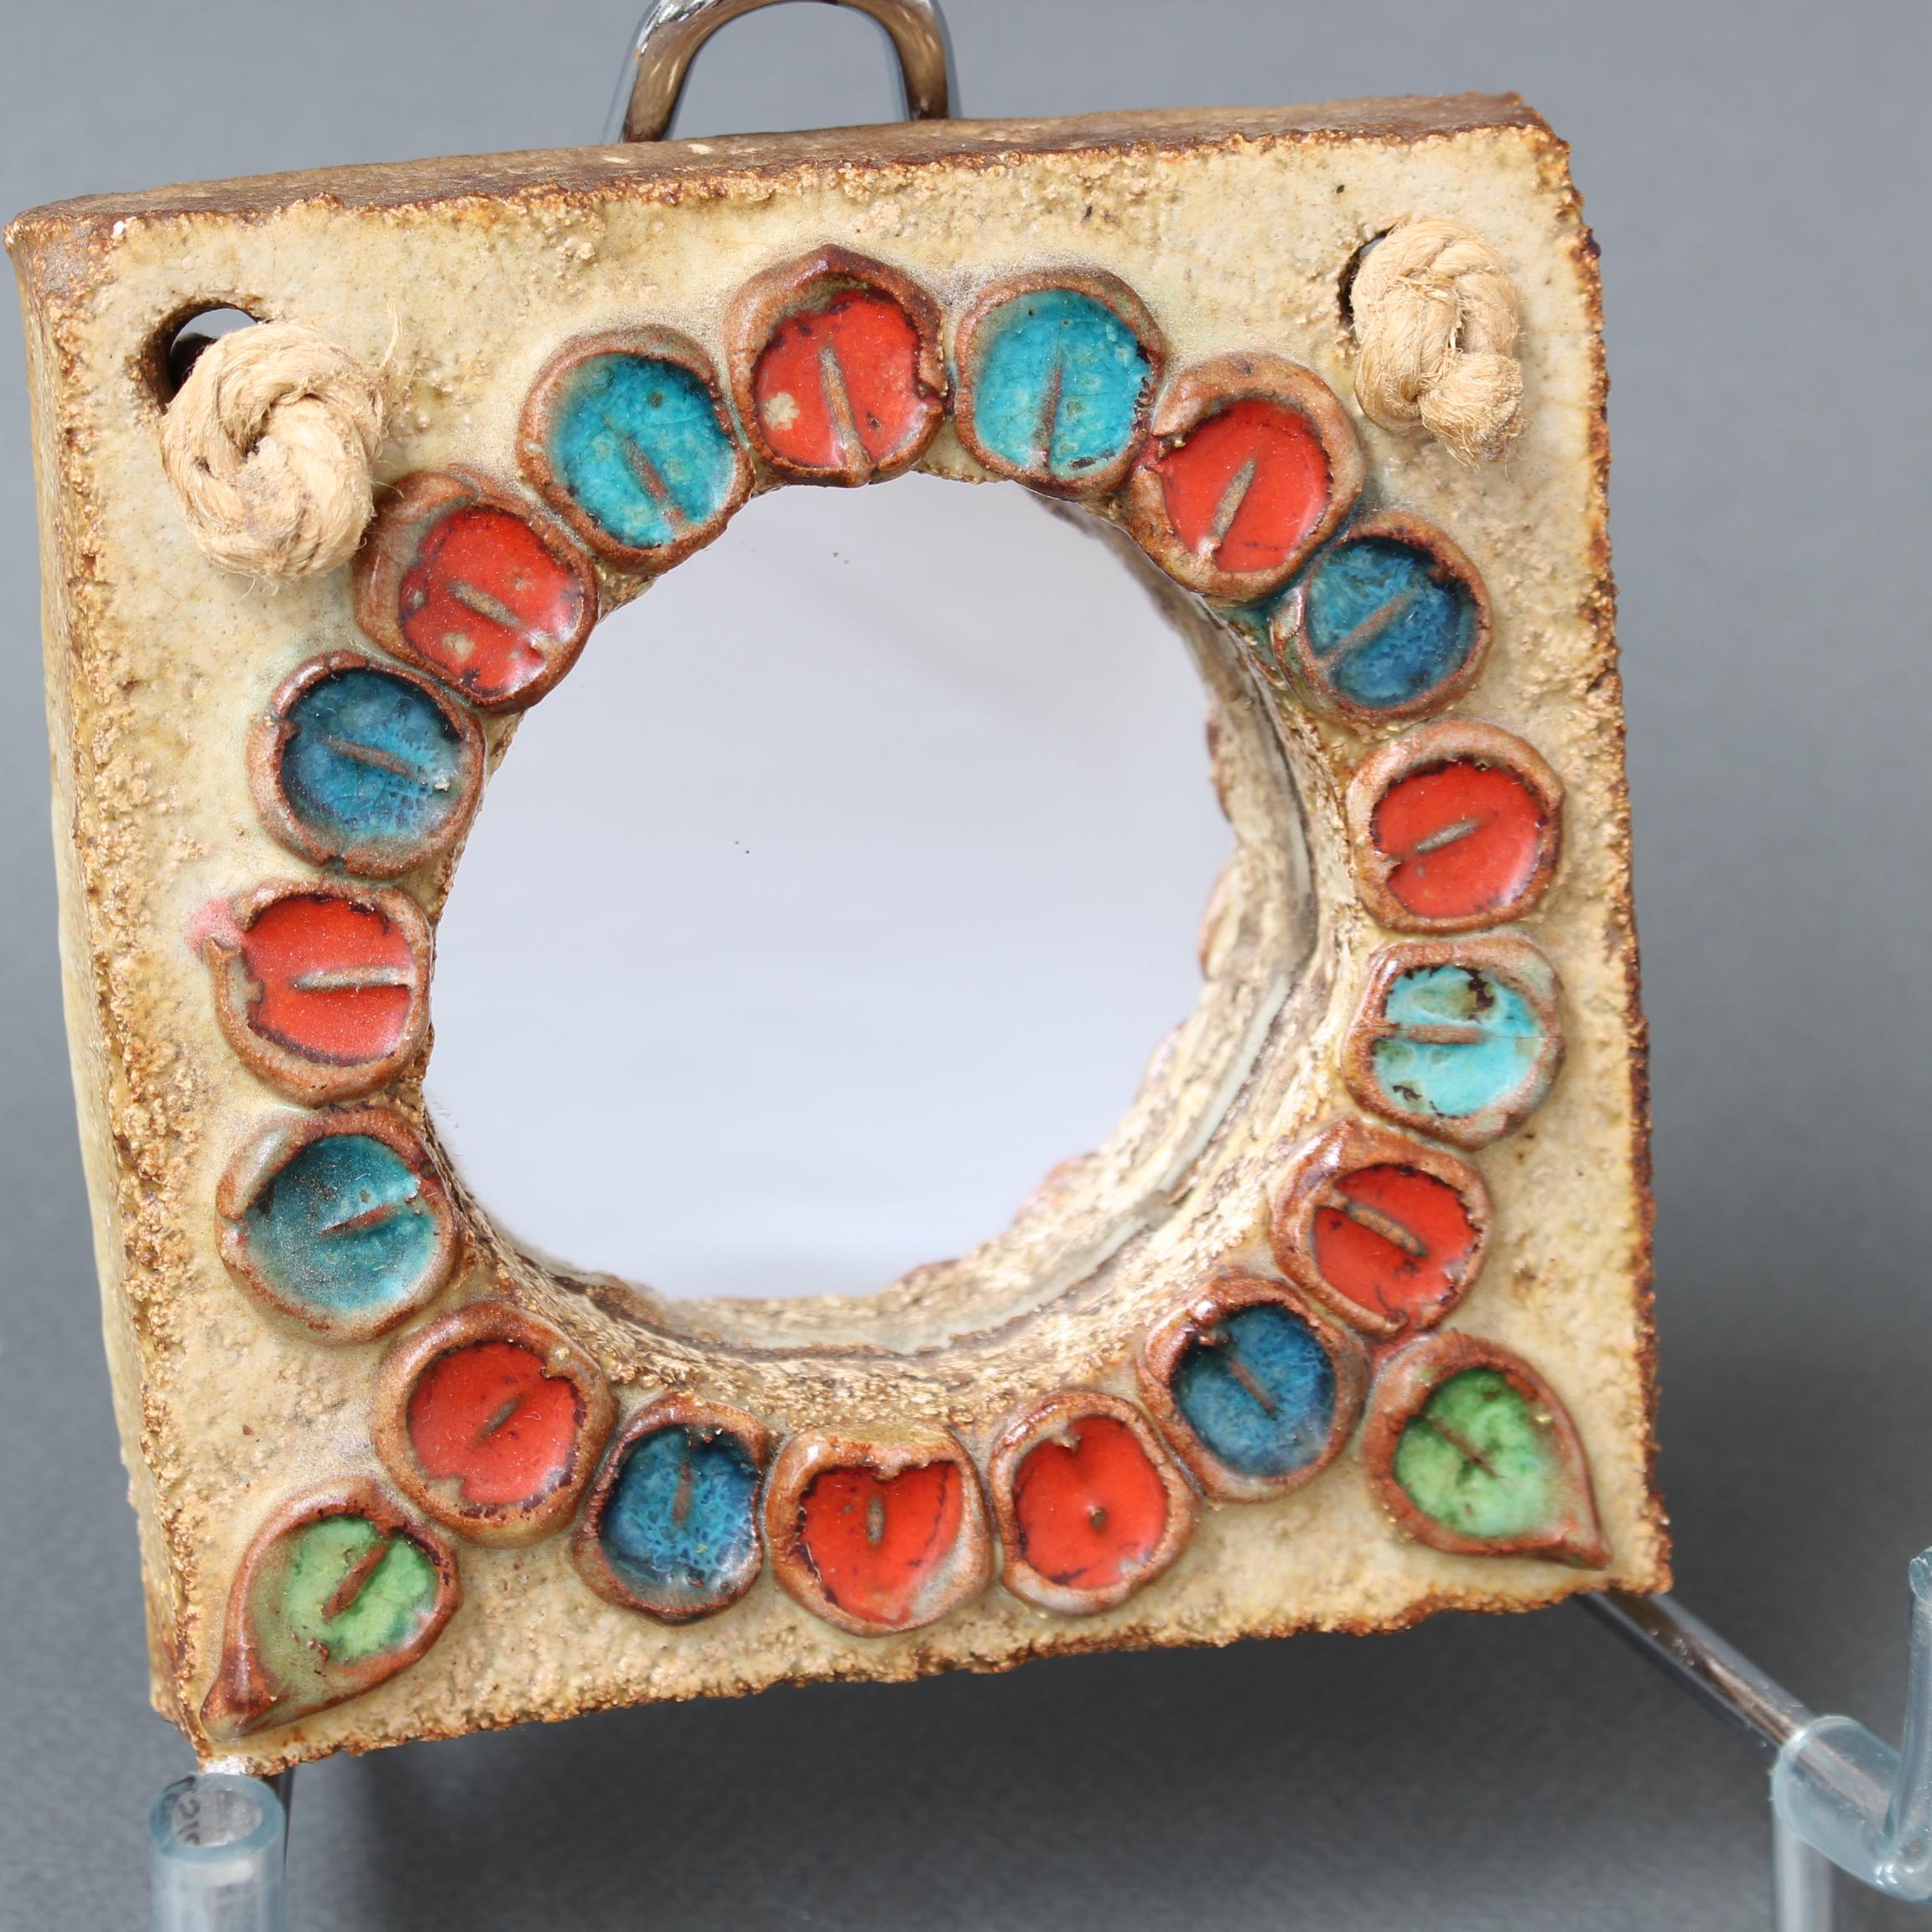 Small Vintage Ceramic Wall Mirror with Flower Motif by La Roue (circa 1960s) For Sale 4